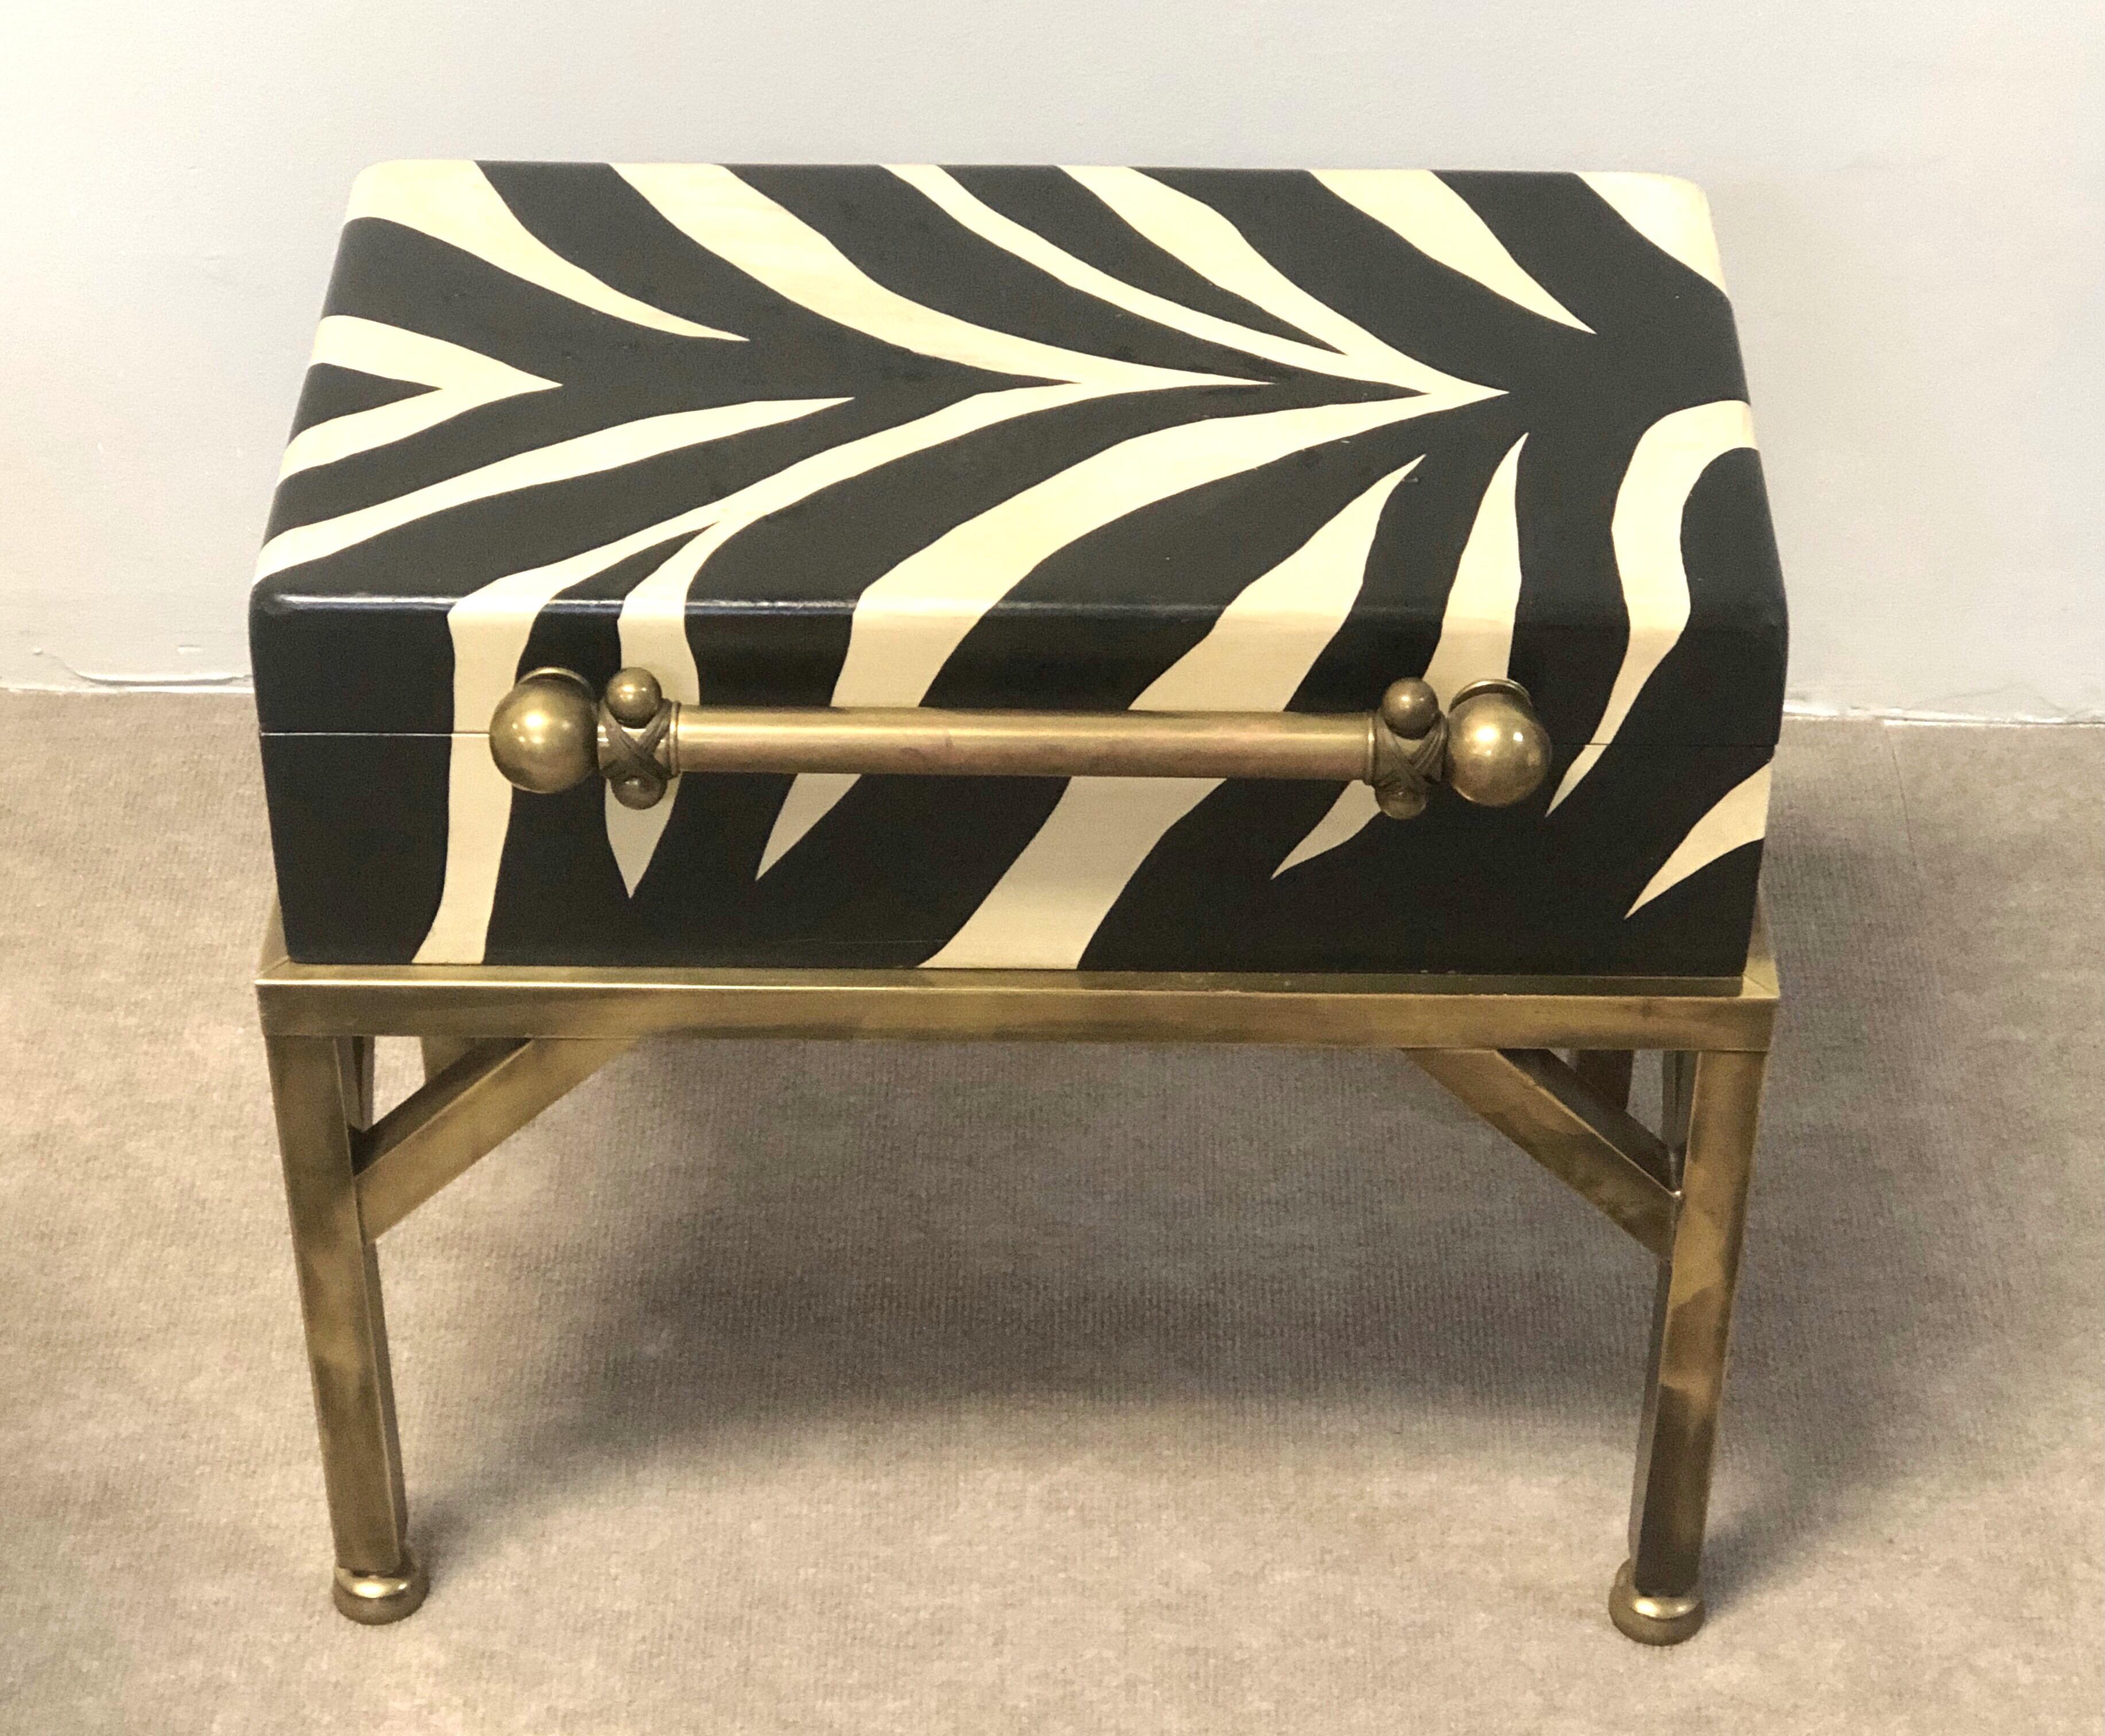 A practical and beautiful box, versatile enough to be used as a small side talbe. Wood construction with a painted finish resembling the zebra stripes.